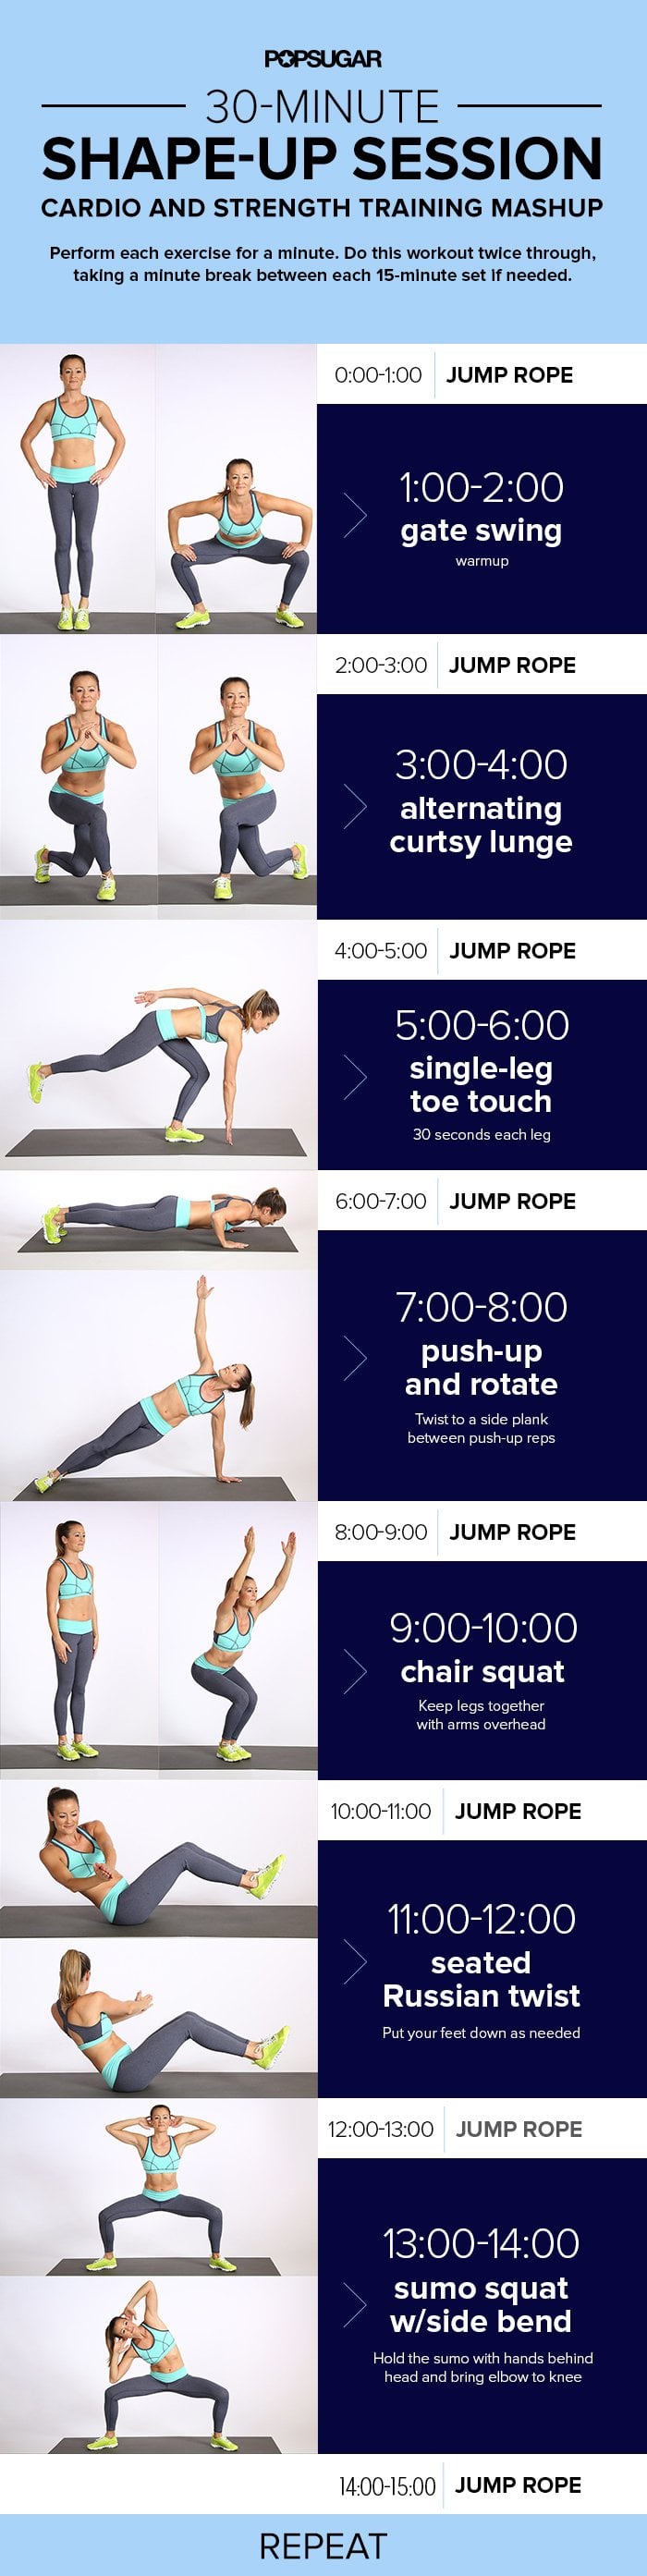 Jumping Interval Workout